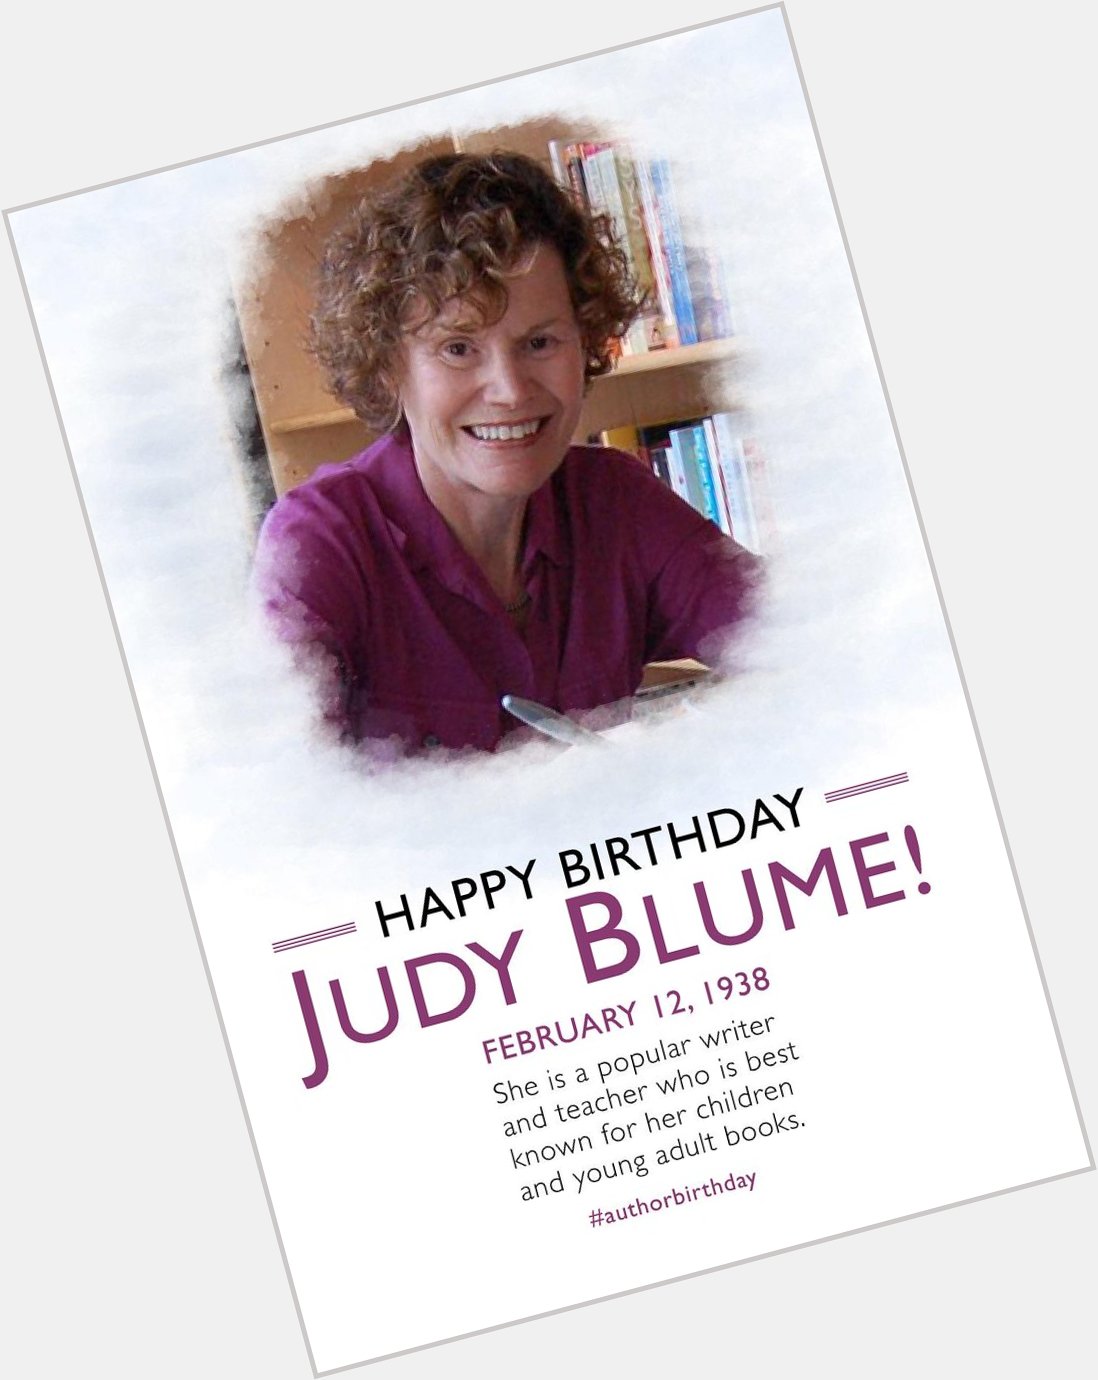 Happy birthday, Judy Blume! Her many young adult novels tackled issues of teenage angst. 